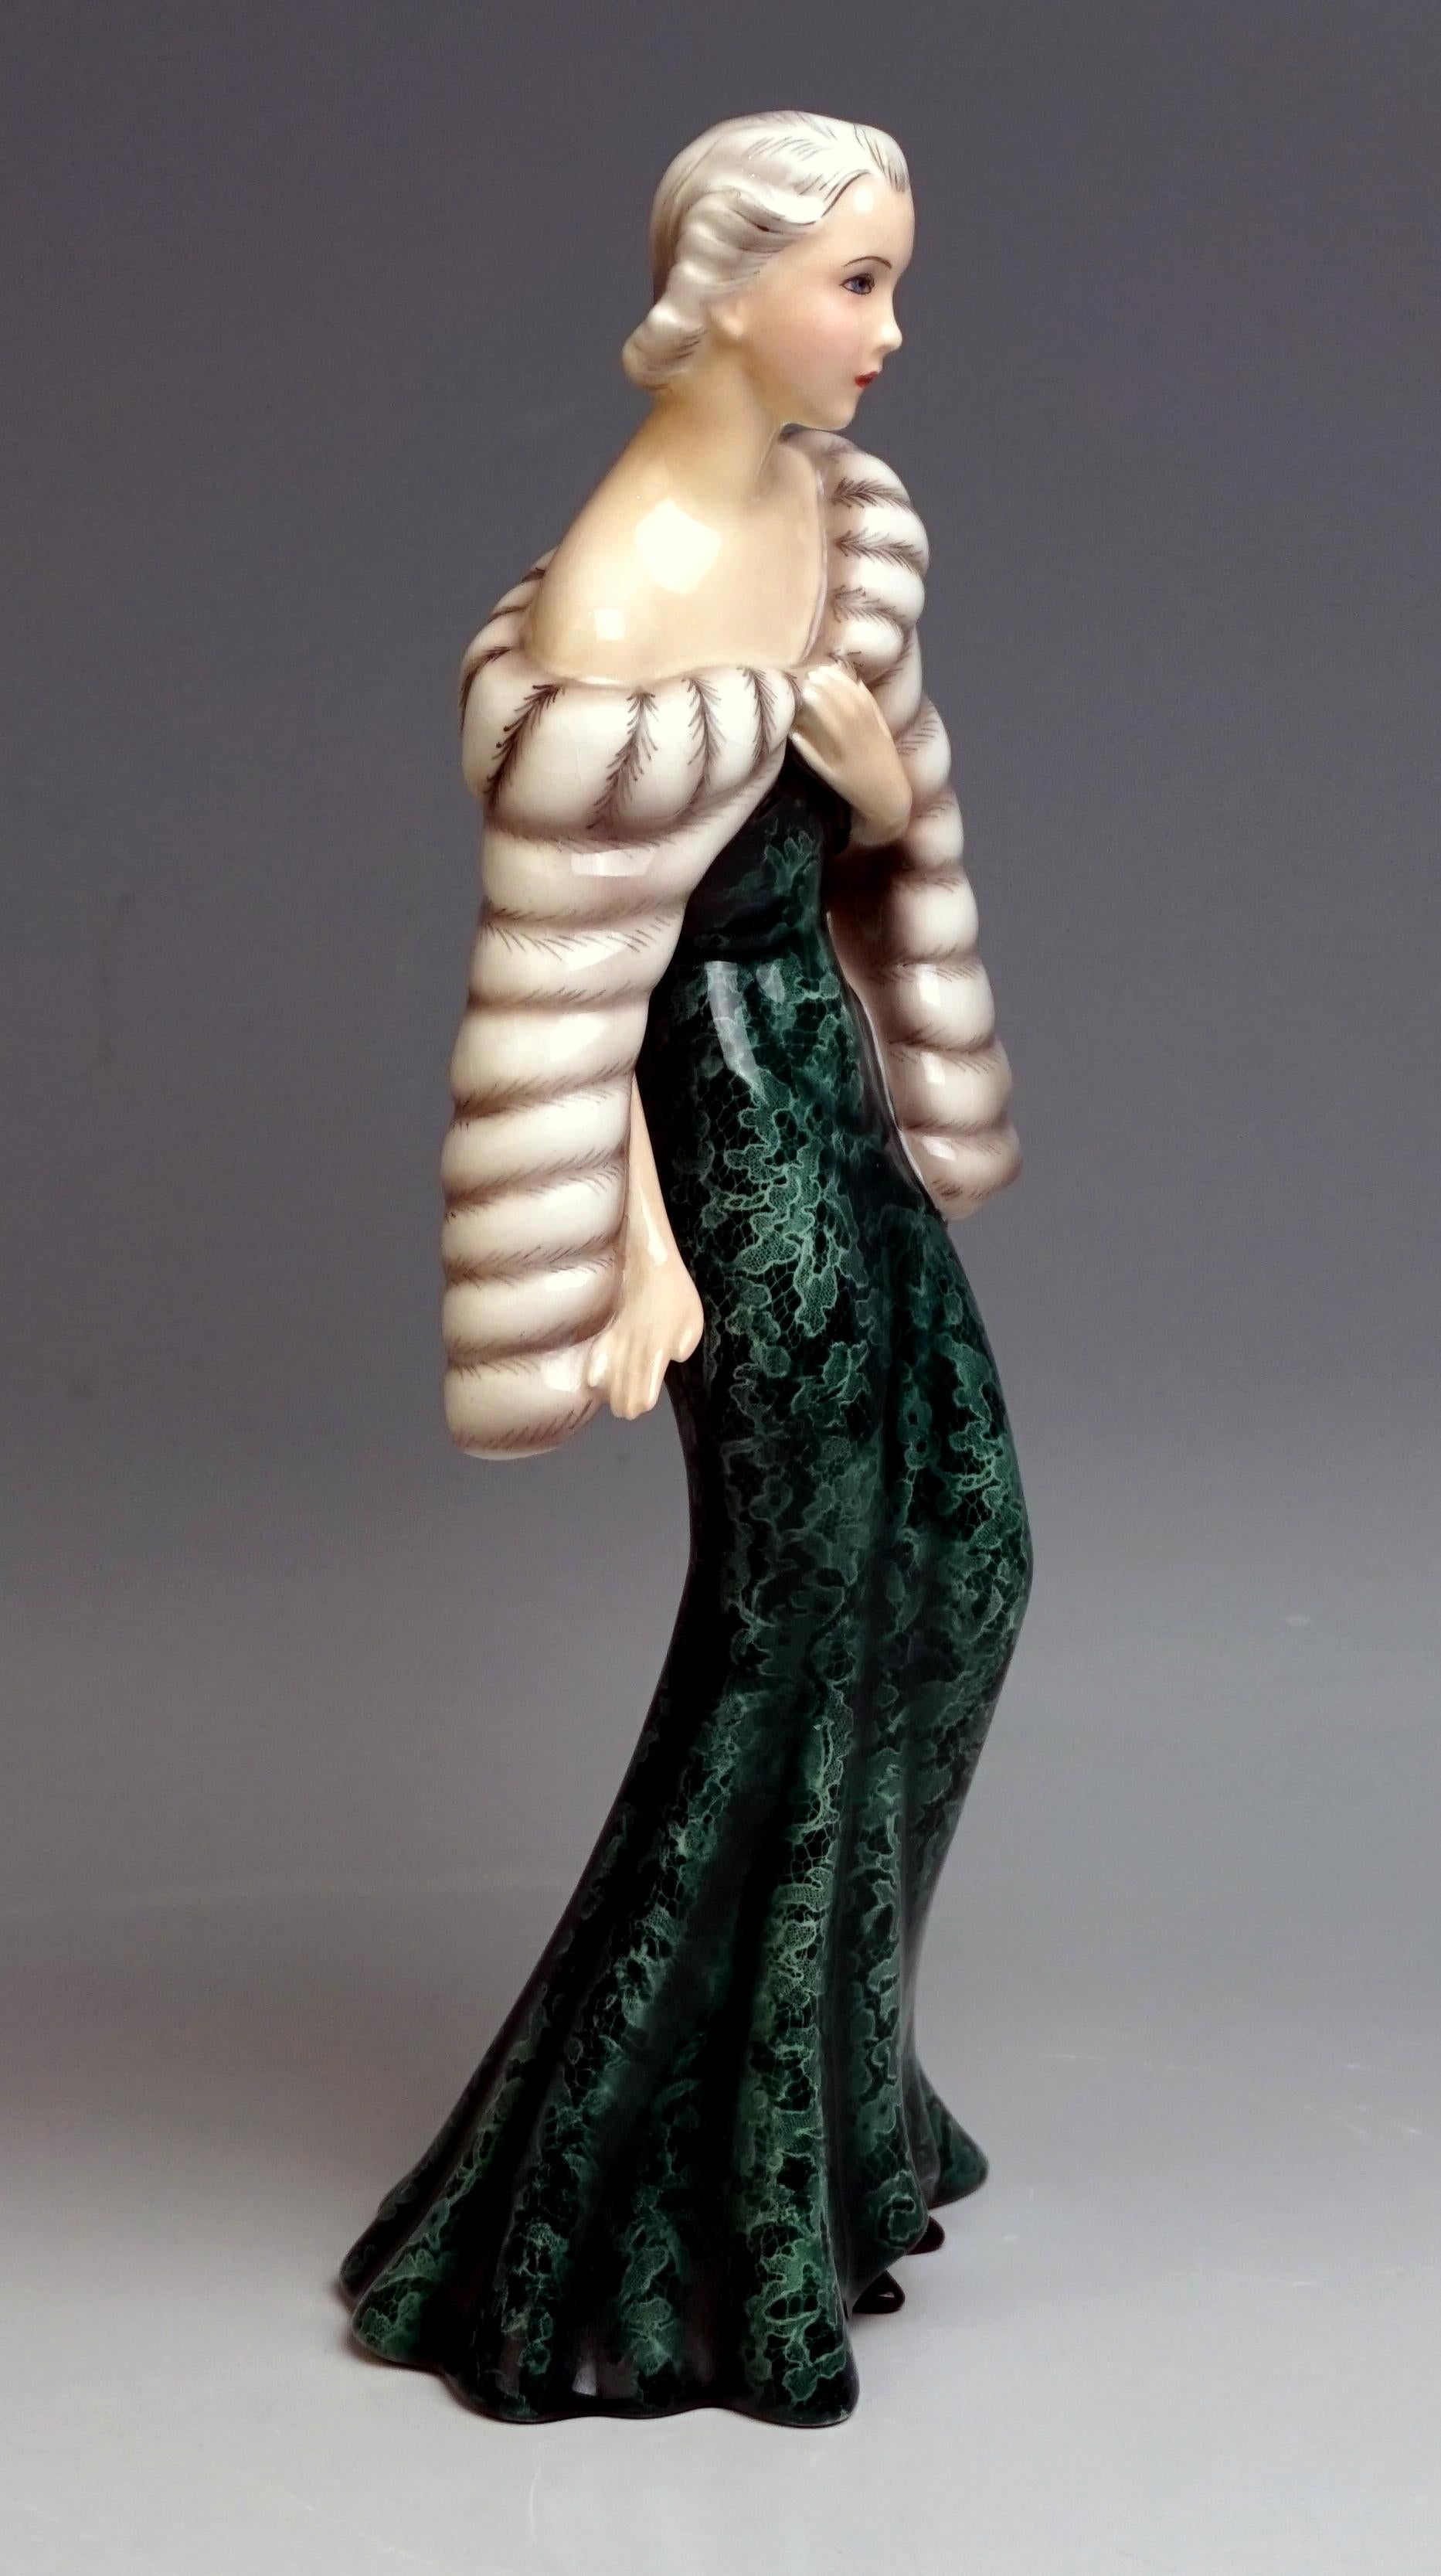 Elegant lady in evening dress and fur cape

Manufactory: Goldscheider Vienna / Austria
Dating: circa 1937-1938
Technique: hand crafted ceramics, finest hand painting, glossy finish

Designer:
Claire/Klára Herczeg/Weiss (1906-1997)
The model